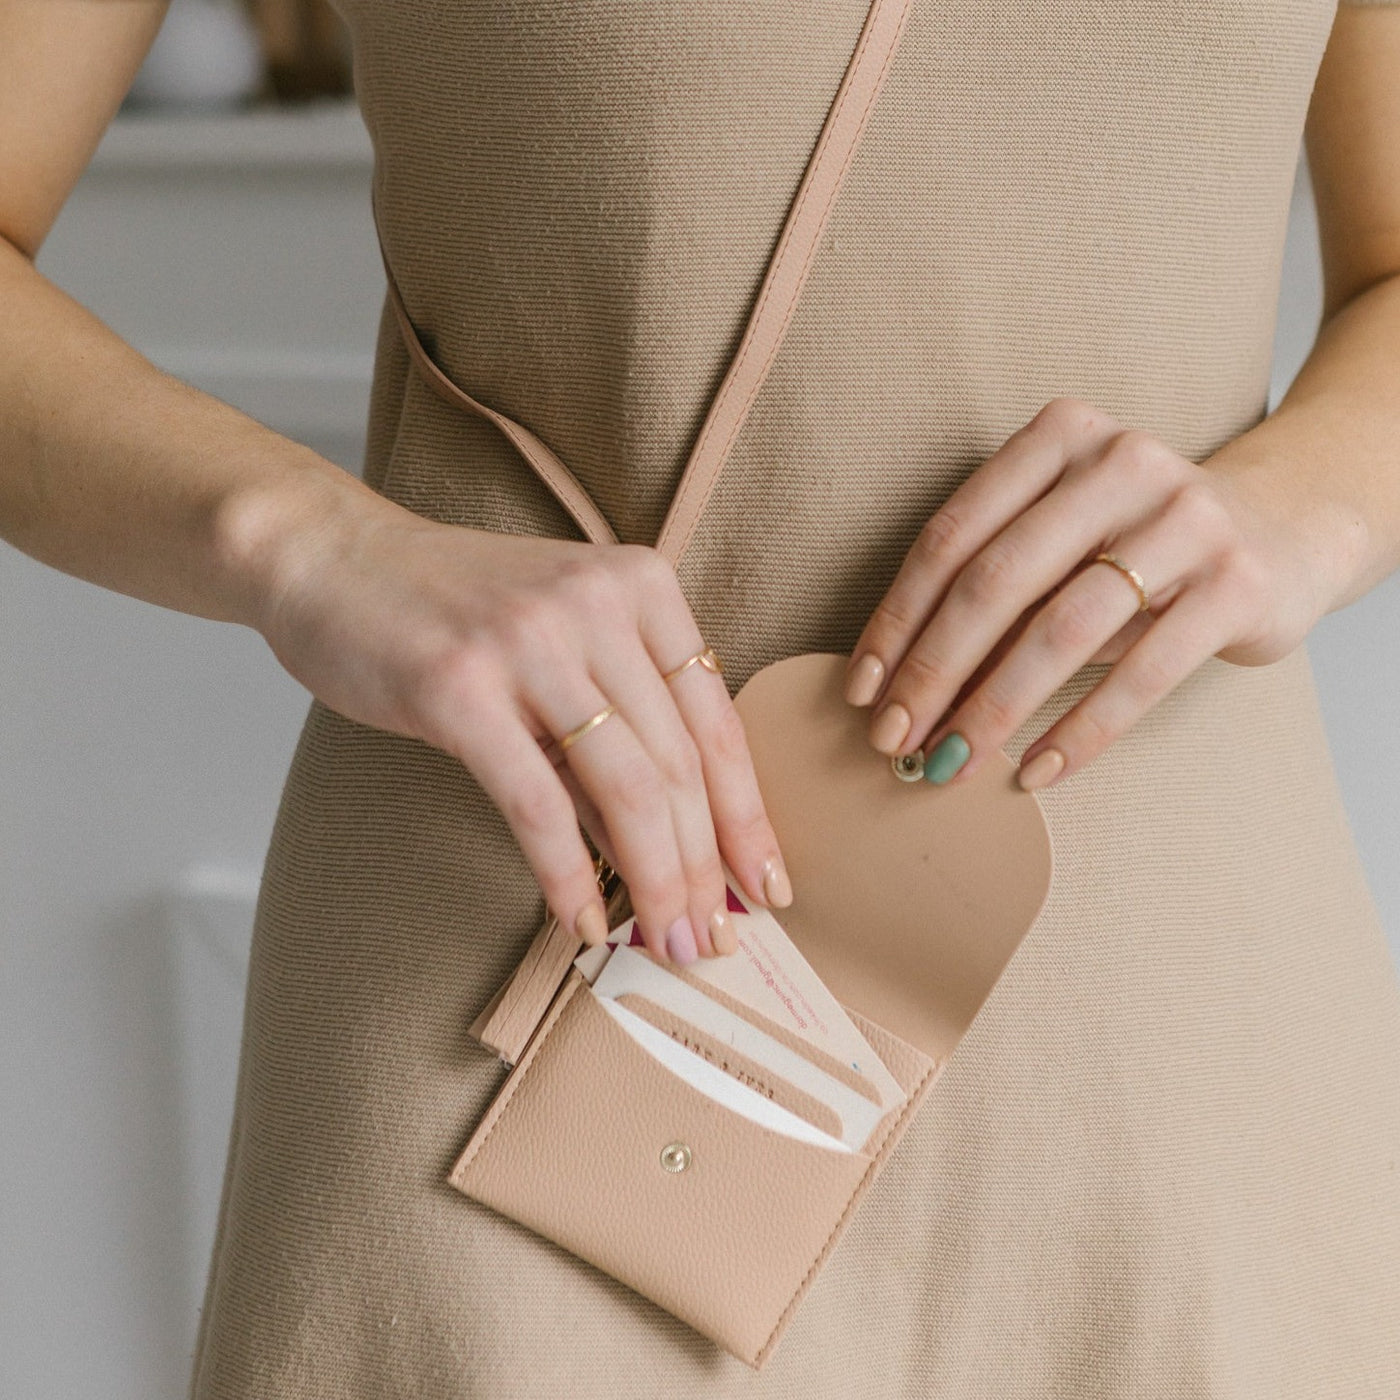 Lark and Ives / Vegan Leather Accessories / Adjustable Strap / Removable Strap / Bag Strap / Nude Pink / Card Purse on Strap